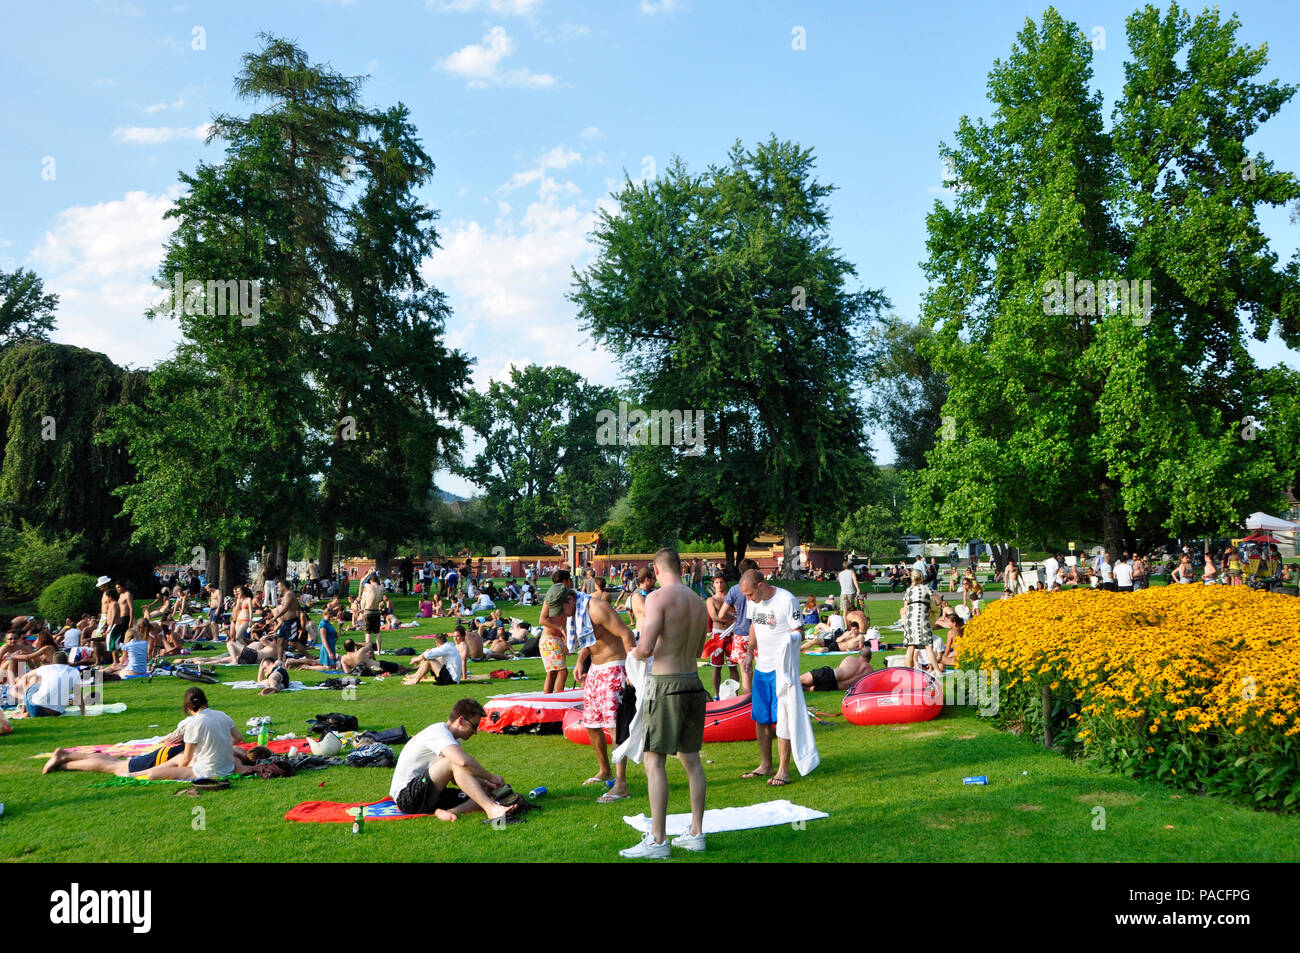 Sumertime at the boarder of lake Zürich: Masses of peoples relaxing, grilling and enjoying the sunshine in the chines garden lake park Stock Photo